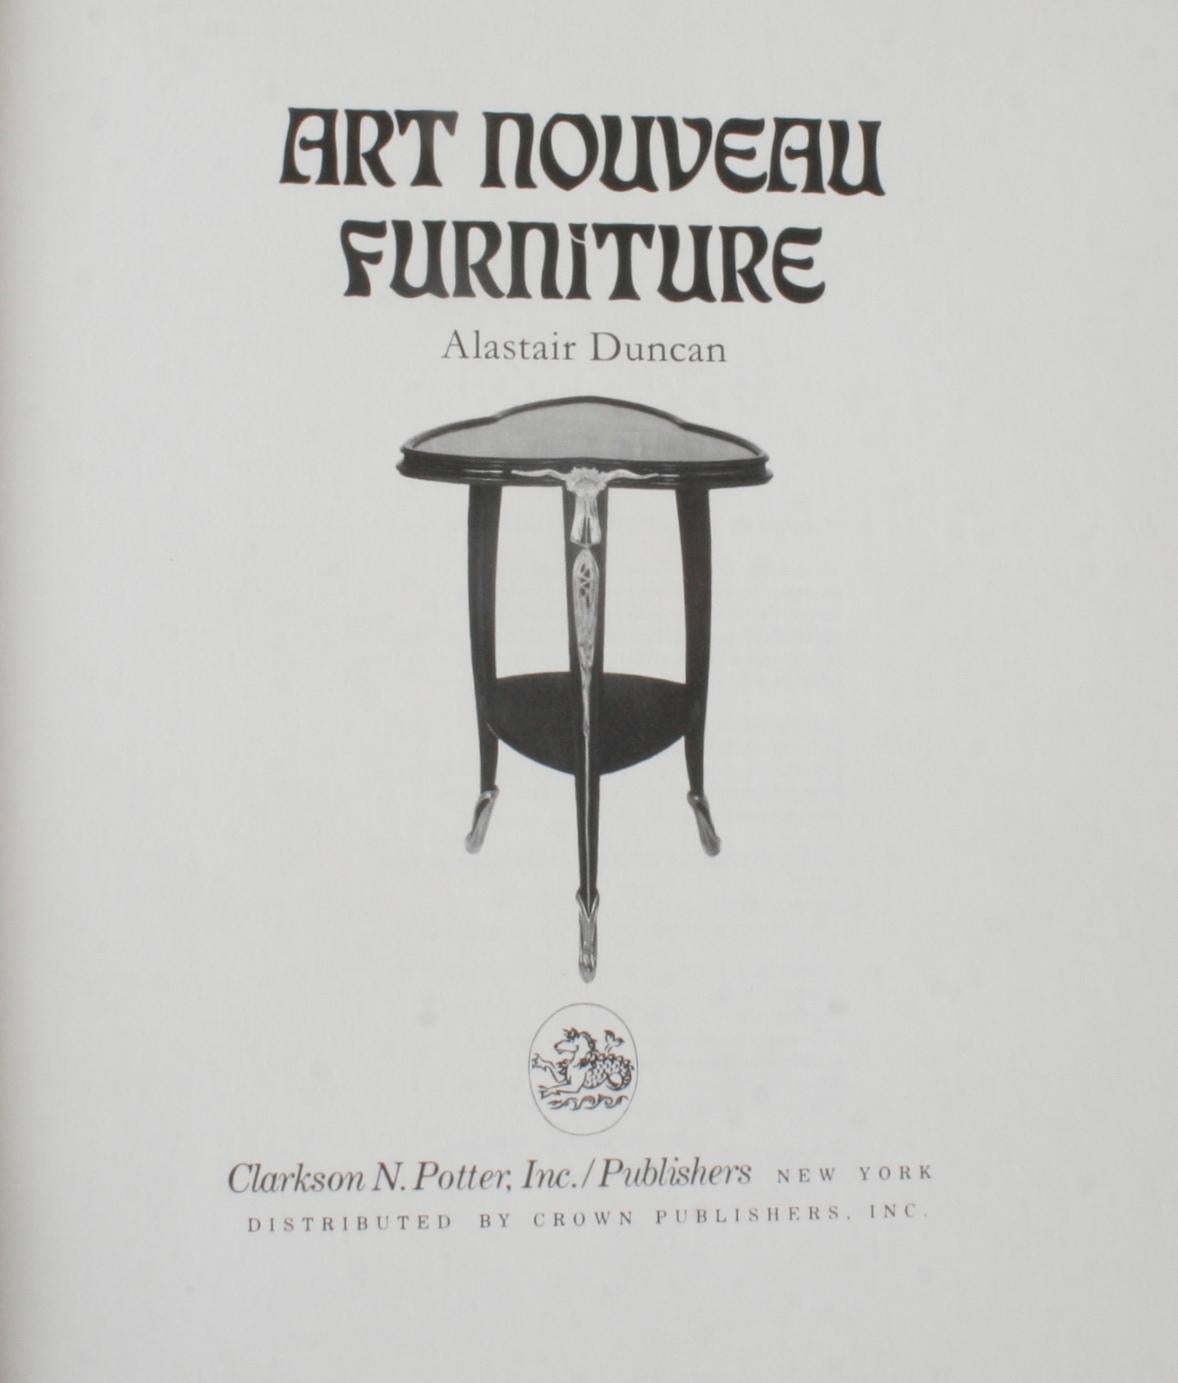 Art Nouveau Furniture by Alastair Duncan. New York: Clarkson N. Potter, Inc./Publishers, 1982. Stated First American Edition hardcover with dust jacket. 192 pp. A guide for collectors and Art Nouveau enthusiasts including all areas of Fine and